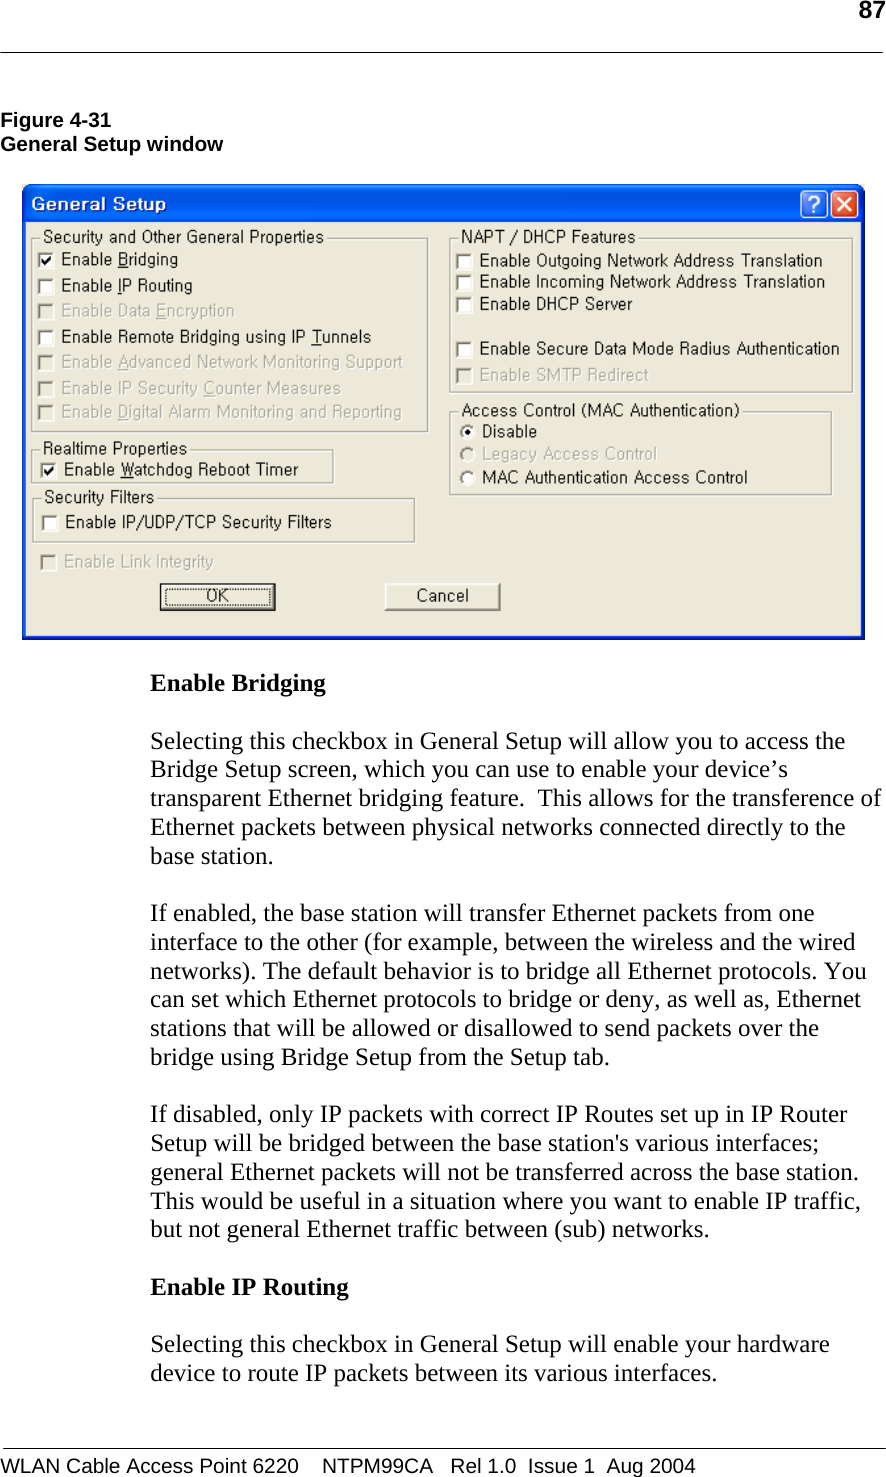   87  Figure 4-31 General Setup window    Enable Bridging  Selecting this checkbox in General Setup will allow you to access the Bridge Setup screen, which you can use to enable your device’s transparent Ethernet bridging feature.  This allows for the transference of Ethernet packets between physical networks connected directly to the base station.   If enabled, the base station will transfer Ethernet packets from one interface to the other (for example, between the wireless and the wired networks). The default behavior is to bridge all Ethernet protocols. You can set which Ethernet protocols to bridge or deny, as well as, Ethernet stations that will be allowed or disallowed to send packets over the bridge using Bridge Setup from the Setup tab.  If disabled, only IP packets with correct IP Routes set up in IP Router Setup will be bridged between the base station&apos;s various interfaces; general Ethernet packets will not be transferred across the base station. This would be useful in a situation where you want to enable IP traffic, but not general Ethernet traffic between (sub) networks.  Enable IP Routing  Selecting this checkbox in General Setup will enable your hardware device to route IP packets between its various interfaces.  WLAN Cable Access Point 6220    NTPM99CA   Rel 1.0  Issue 1  Aug 2004 